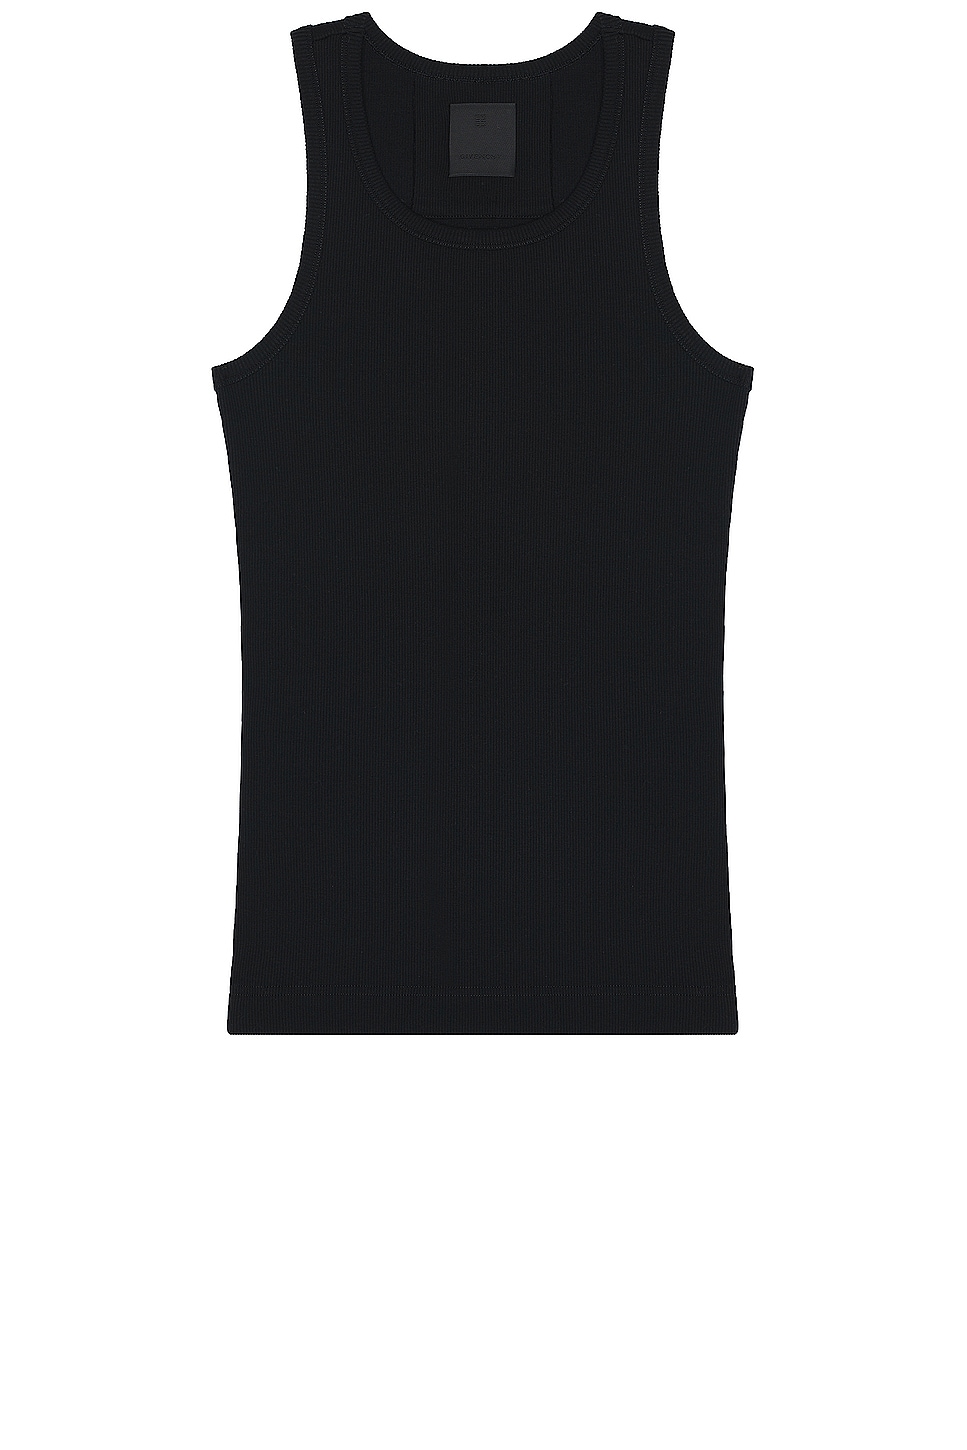 Image 1 of Givenchy Xslim Tank Top in Black